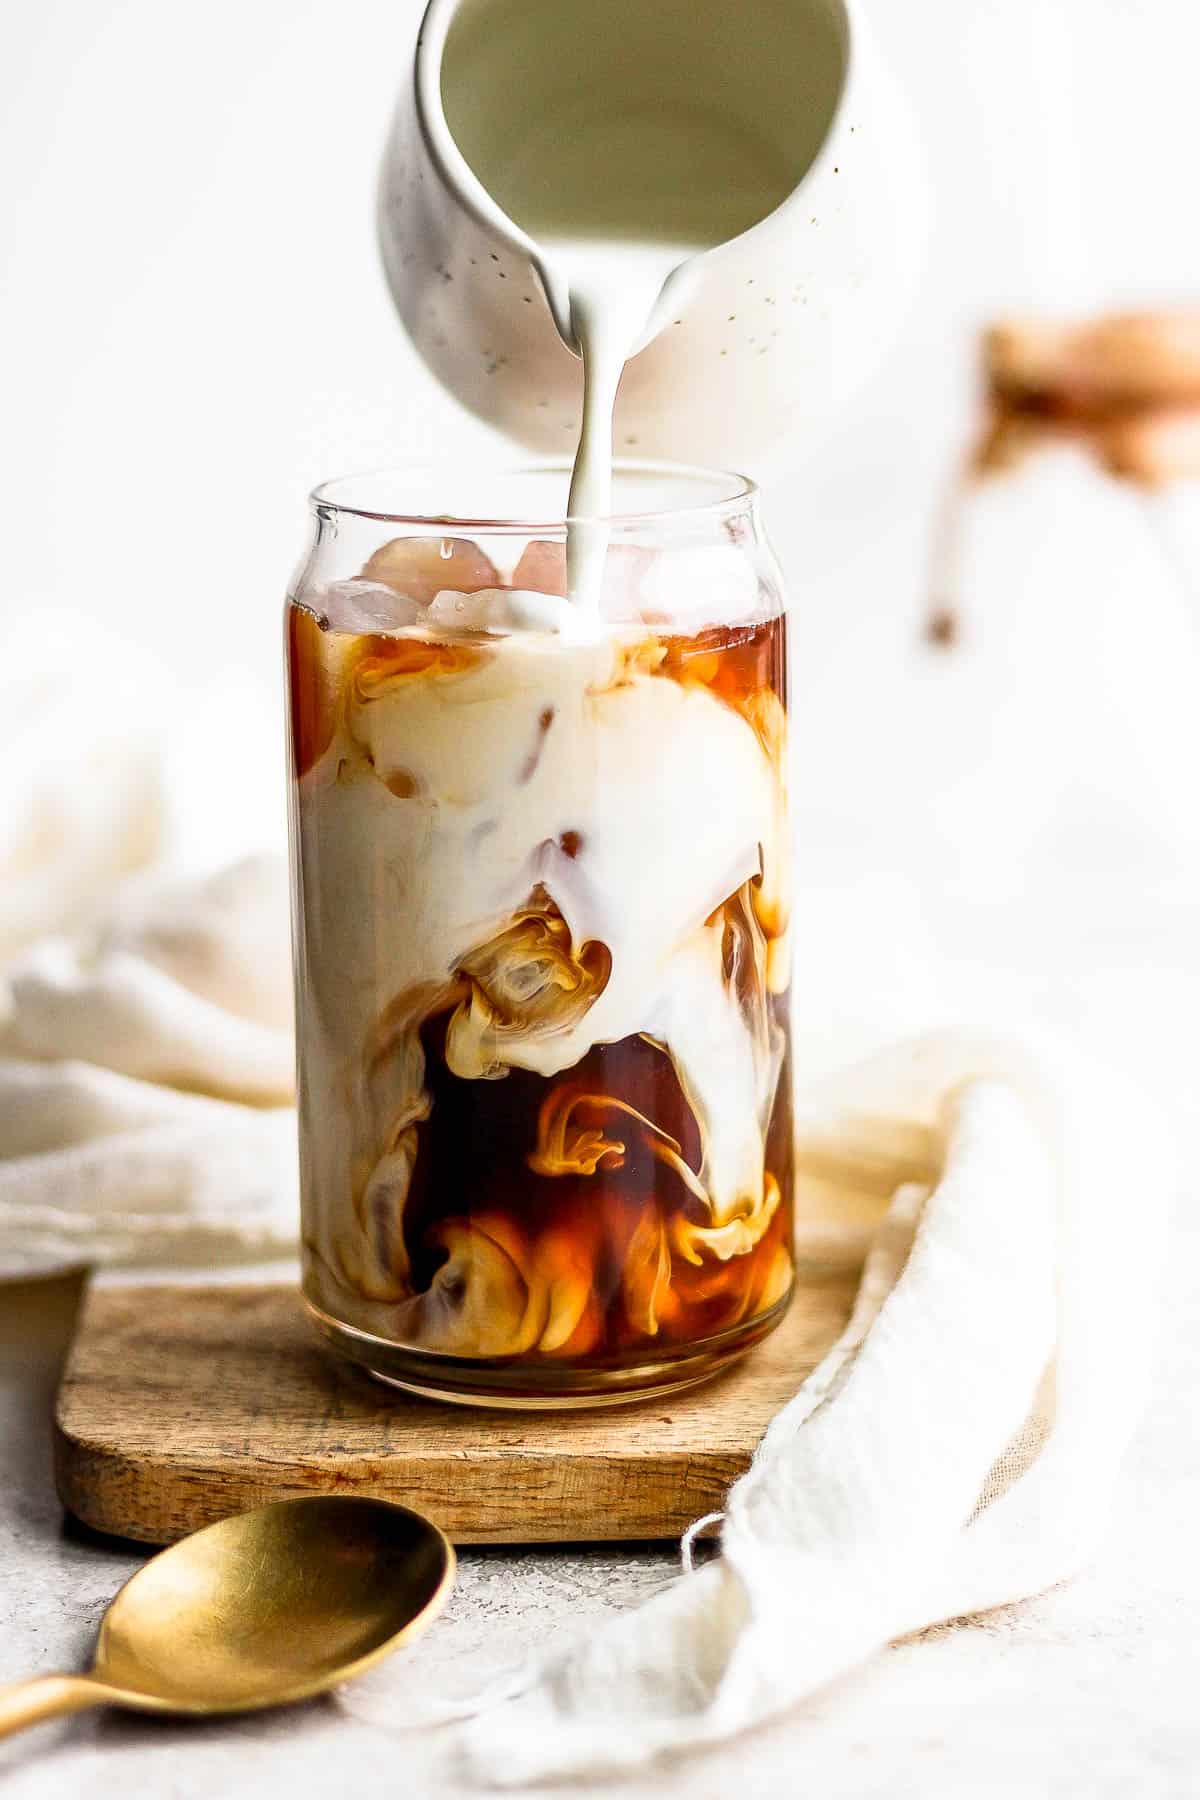 A container pouring cream over iced coffee in a glass.